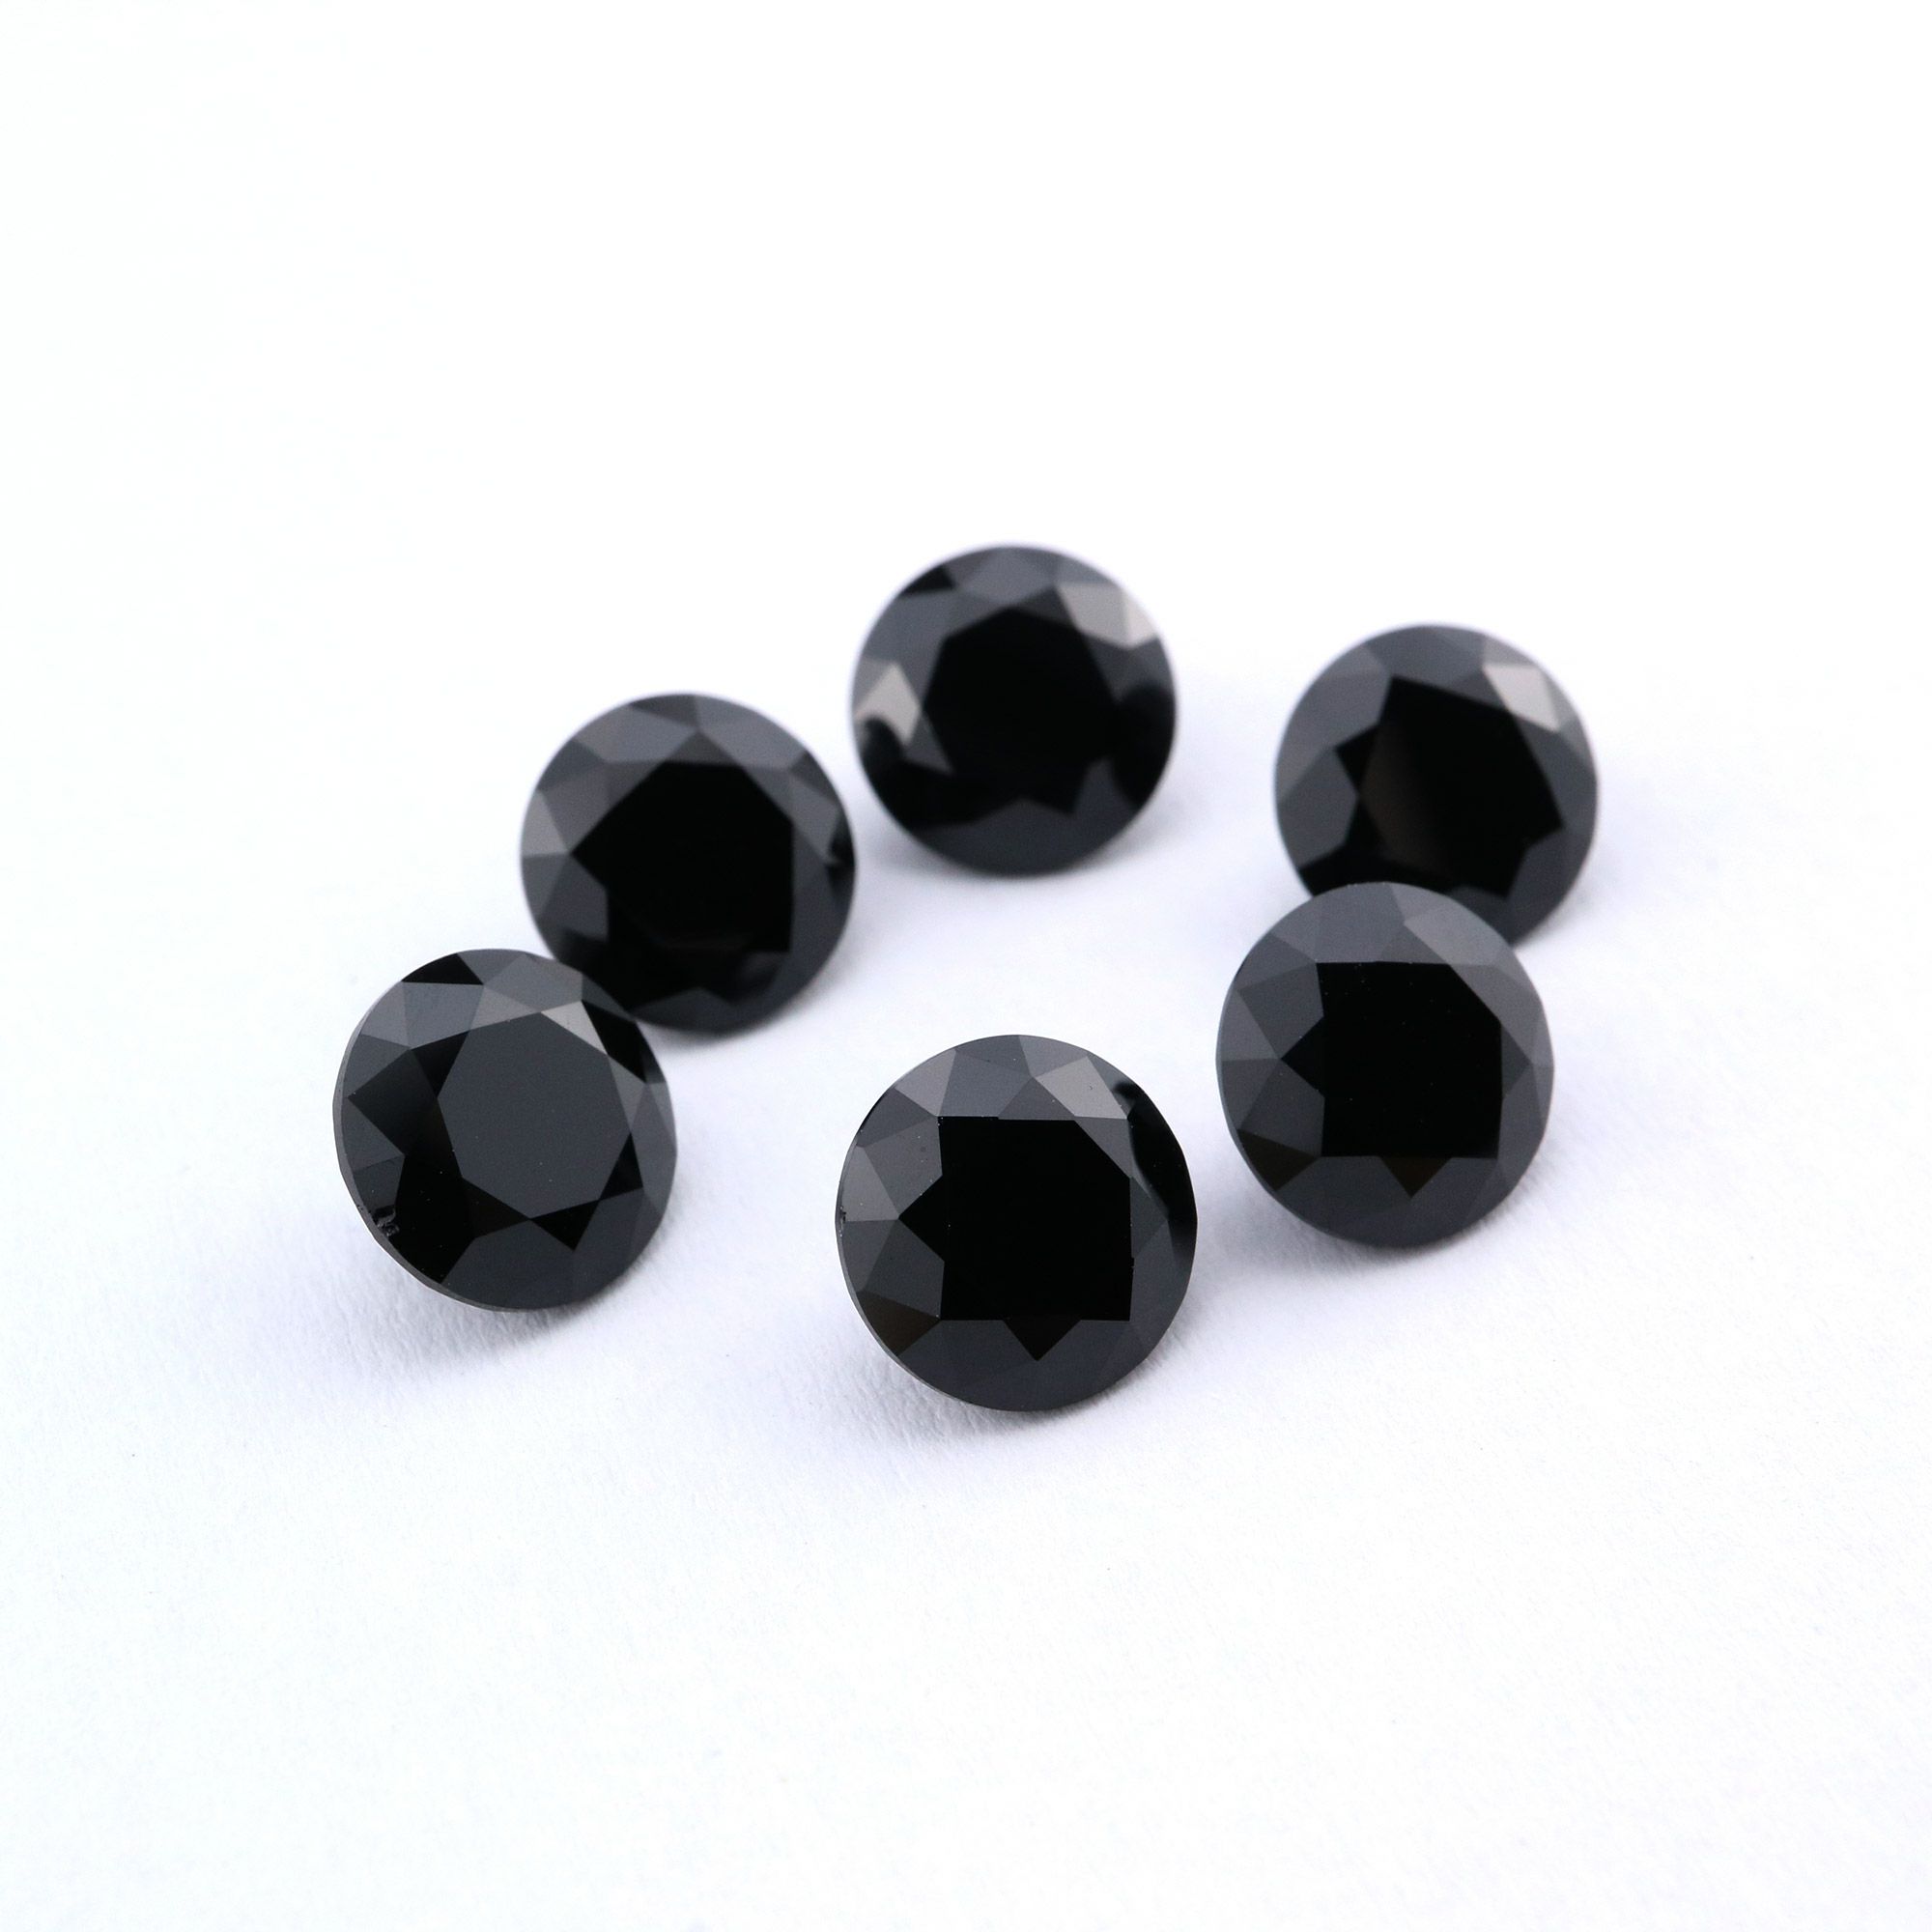 1Pcs 1-9MM Round Black Spinel Faceted Cut Loose Gemstone Natural Semi Precious Stone DIY Jewelry Supplies 4110164 - Click Image to Close